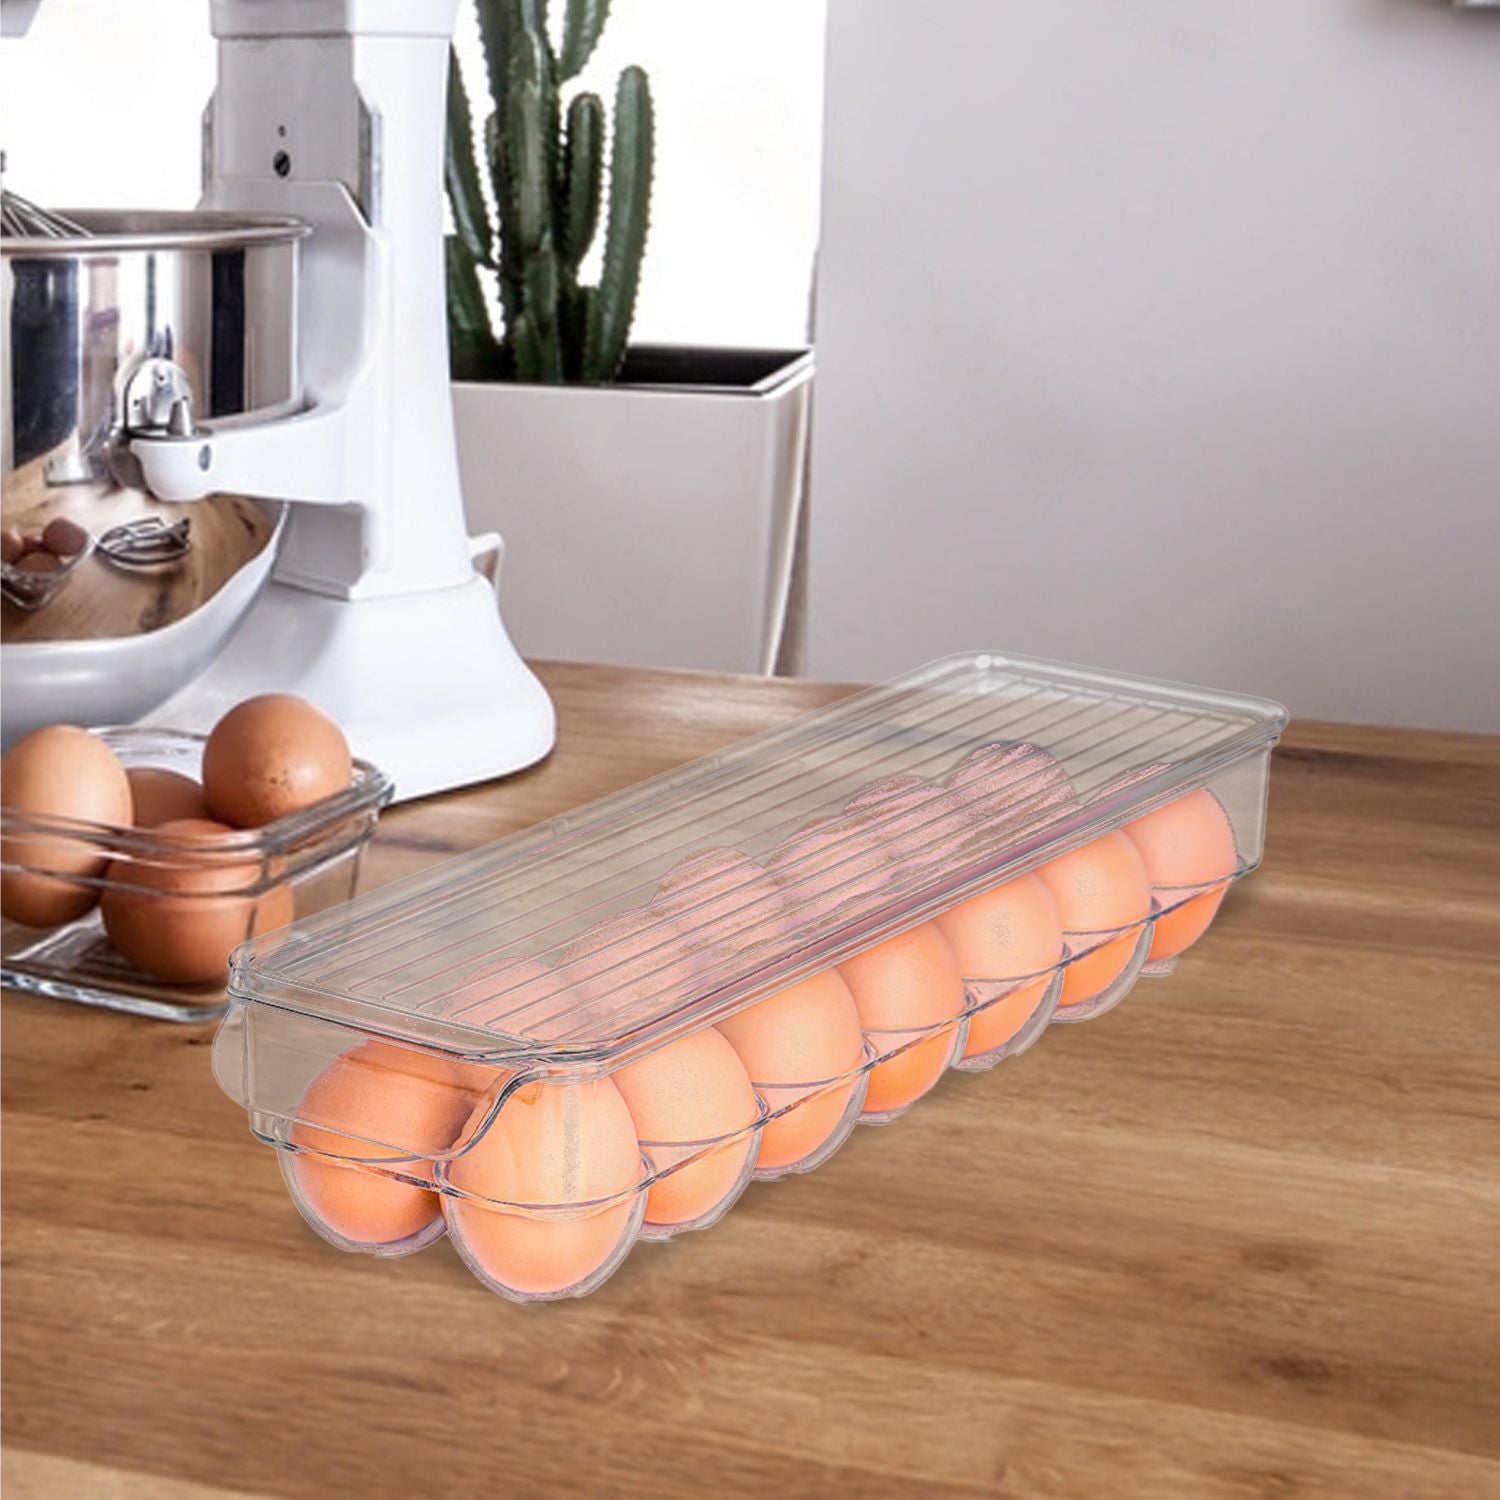 14 Eggs Storage Container with lid